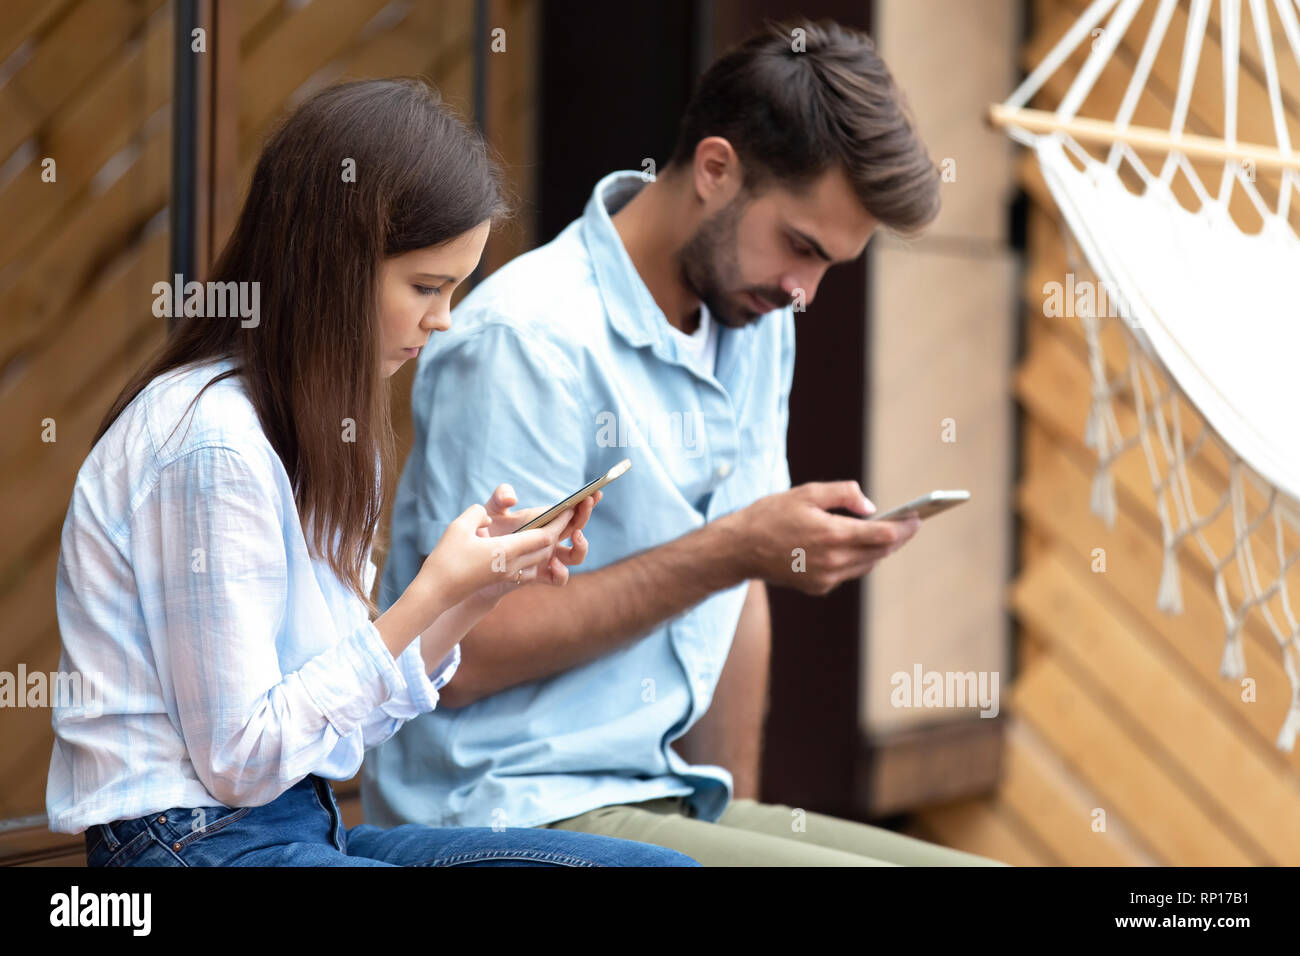 Girl and guy holding smartphones browse internet chatting online Stock Photo